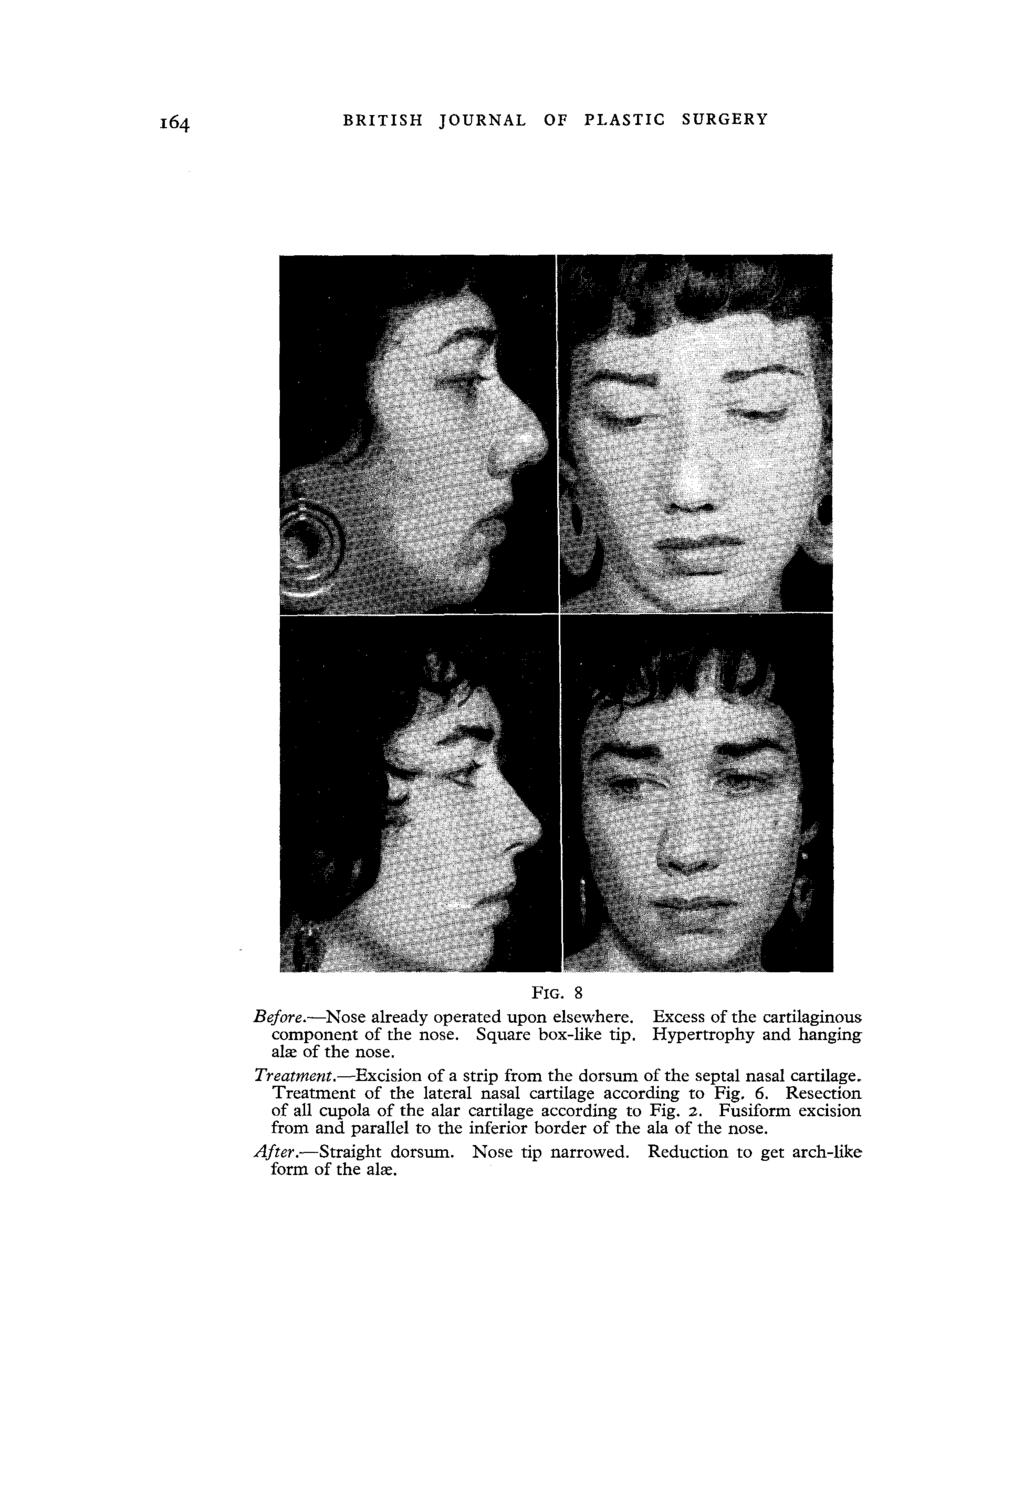 16 4 BRITISH JOURNAL OF PLASTIC SURGERY FIG. 8 Before.--Nose already operated upon elsewhere. Excess of the cartilaginous component of the nose.